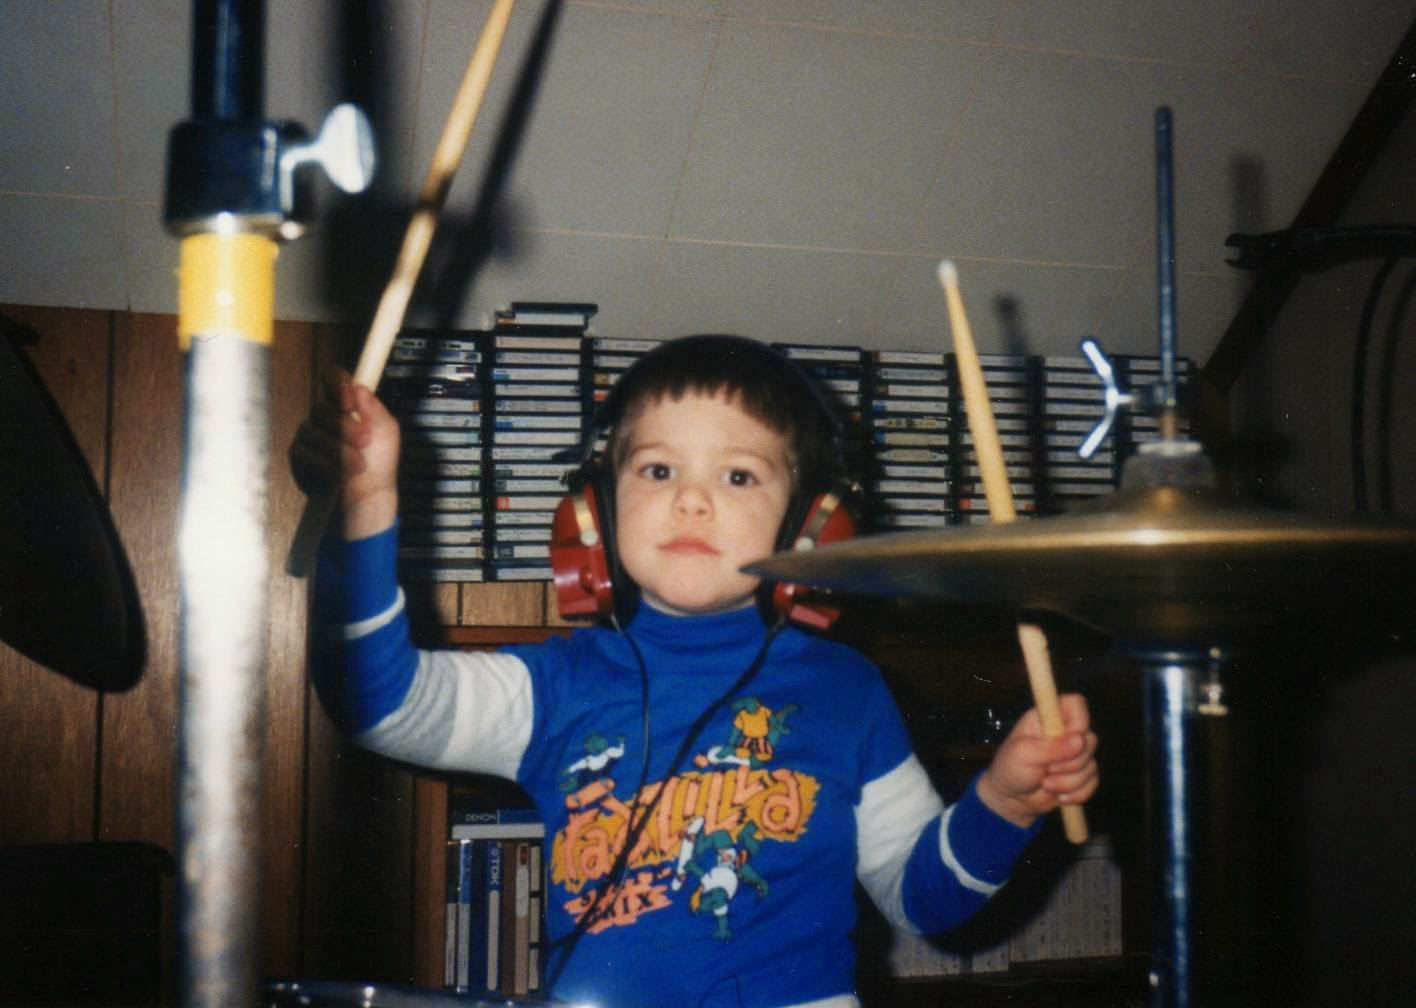 The author's younger brother, Chris, roughly 4 years old, sitting at a drum set, holding sticks, & wearing headphones.